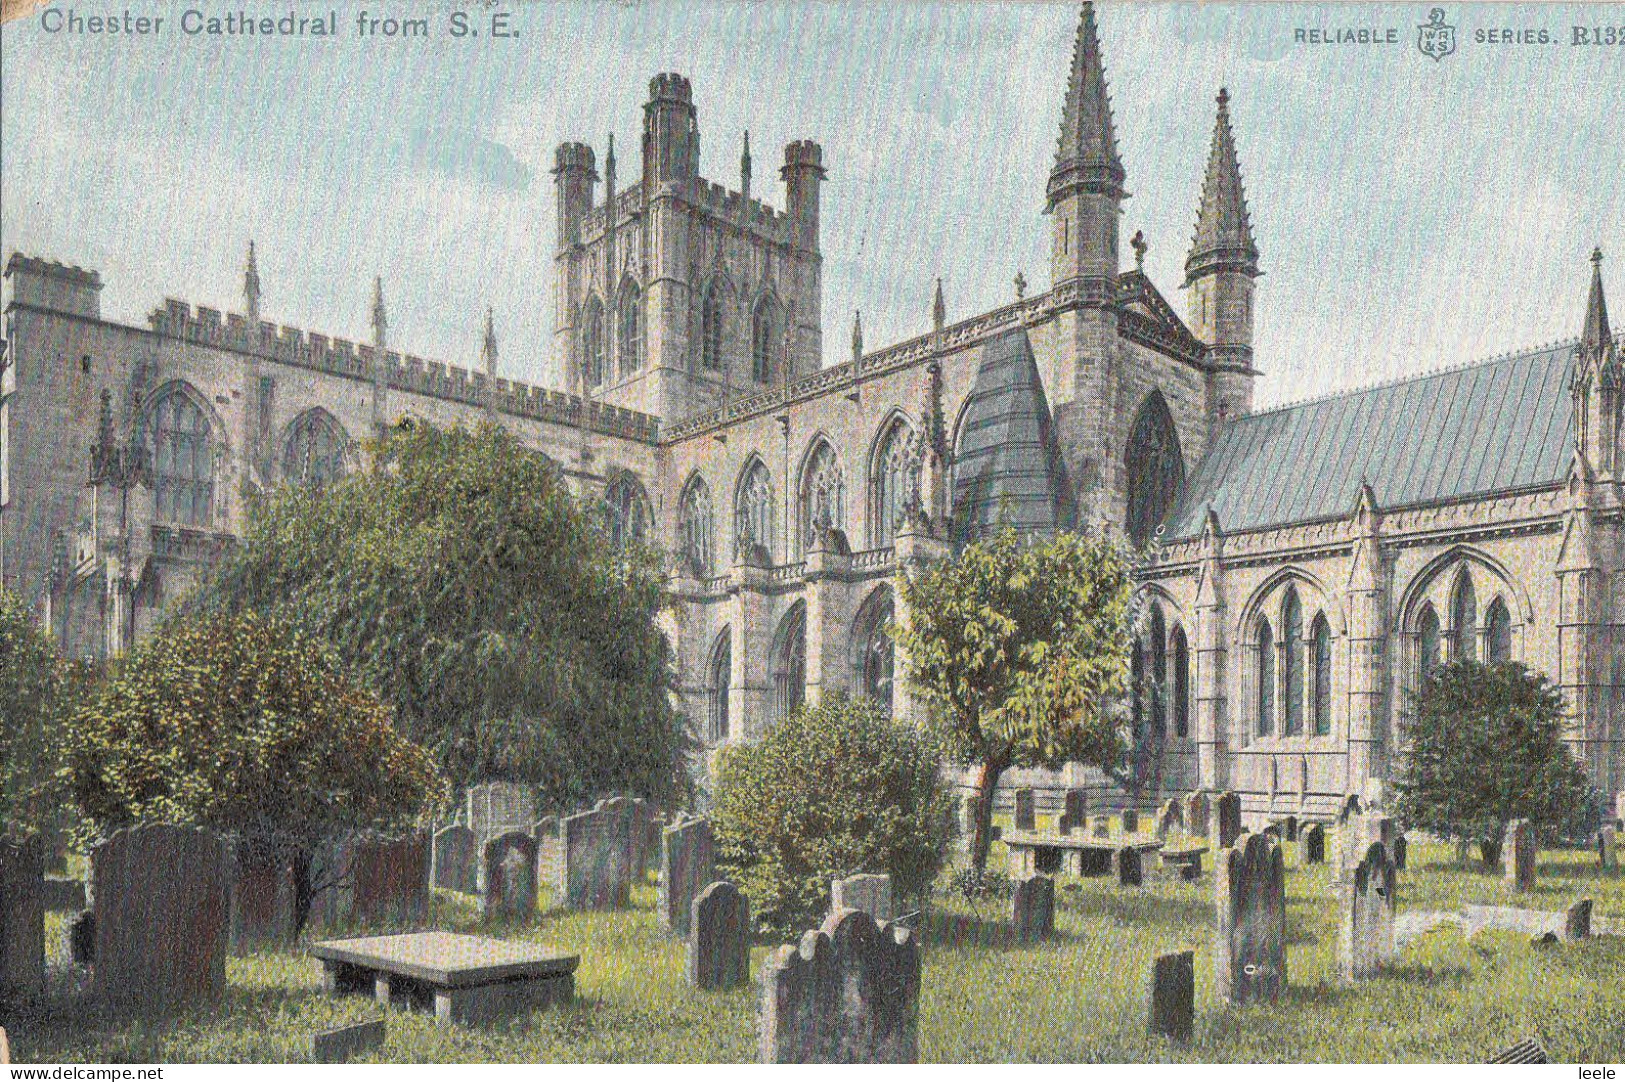 C62. Vintage Postcard. Chester Cathedral From S.E. - Chester